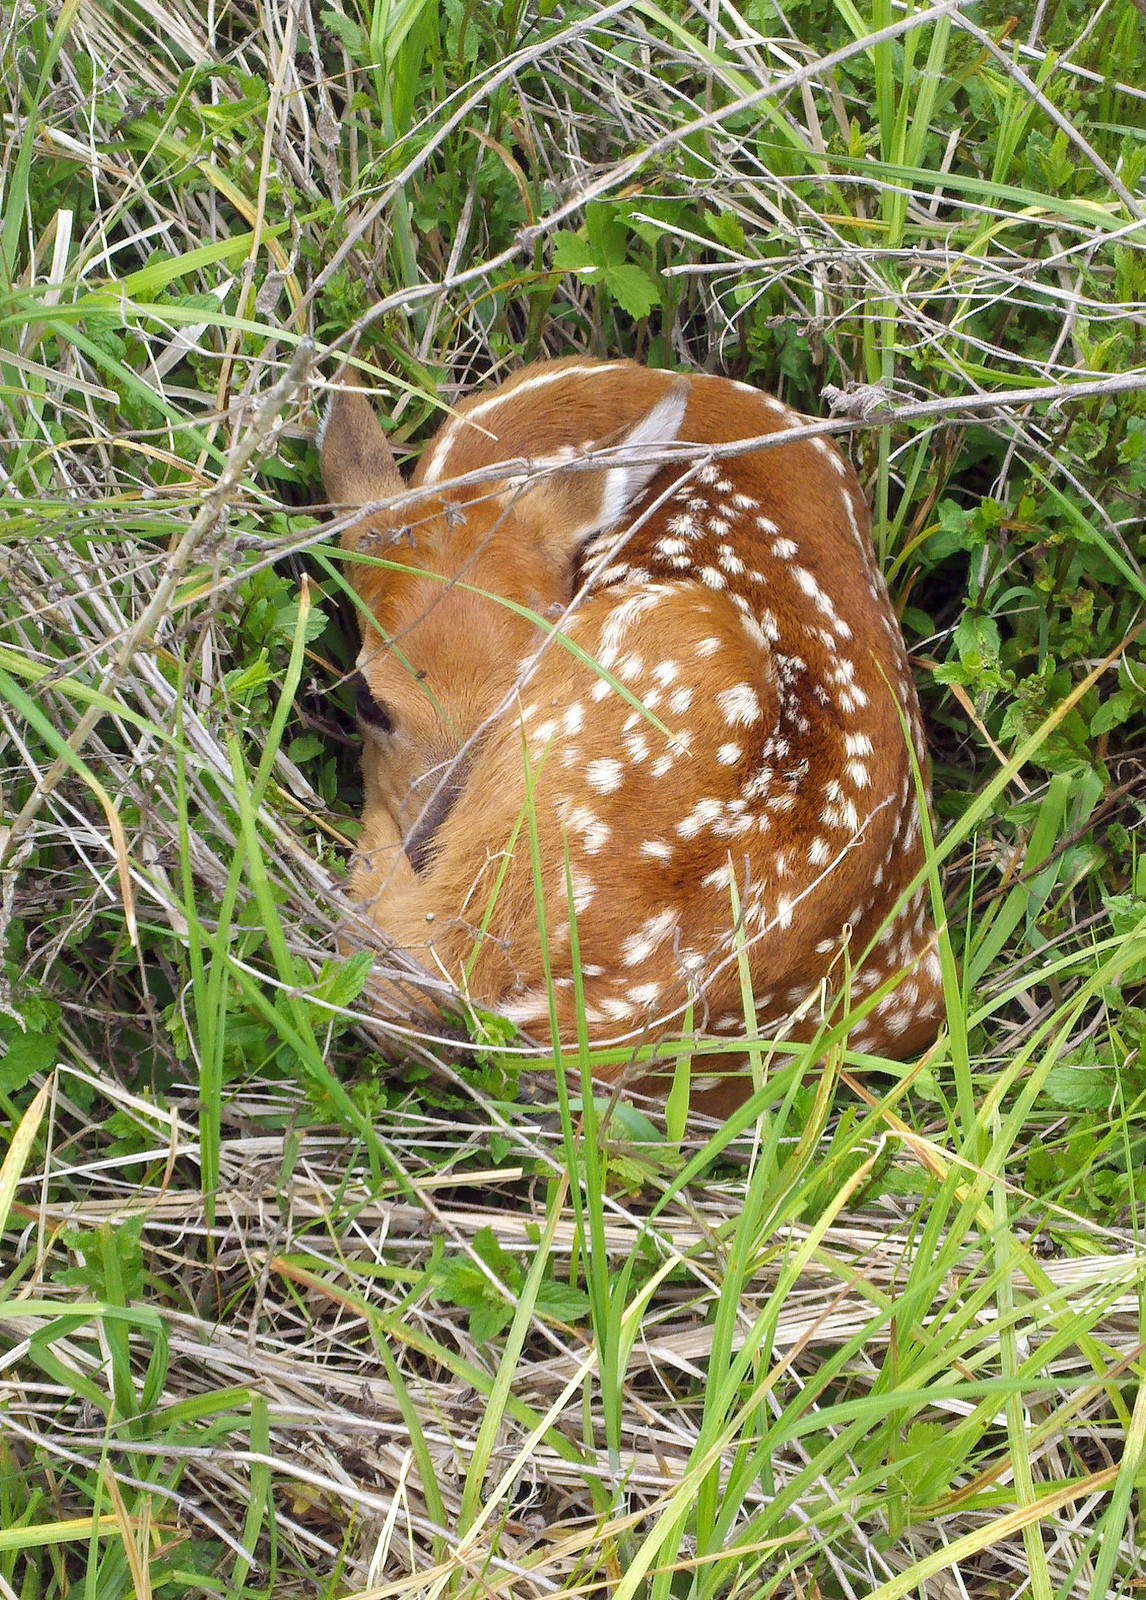 Fawn having a nap in the grass | Wisconsin Department of Natural Resources  -  Foter  -  CC BY-ND 2.0